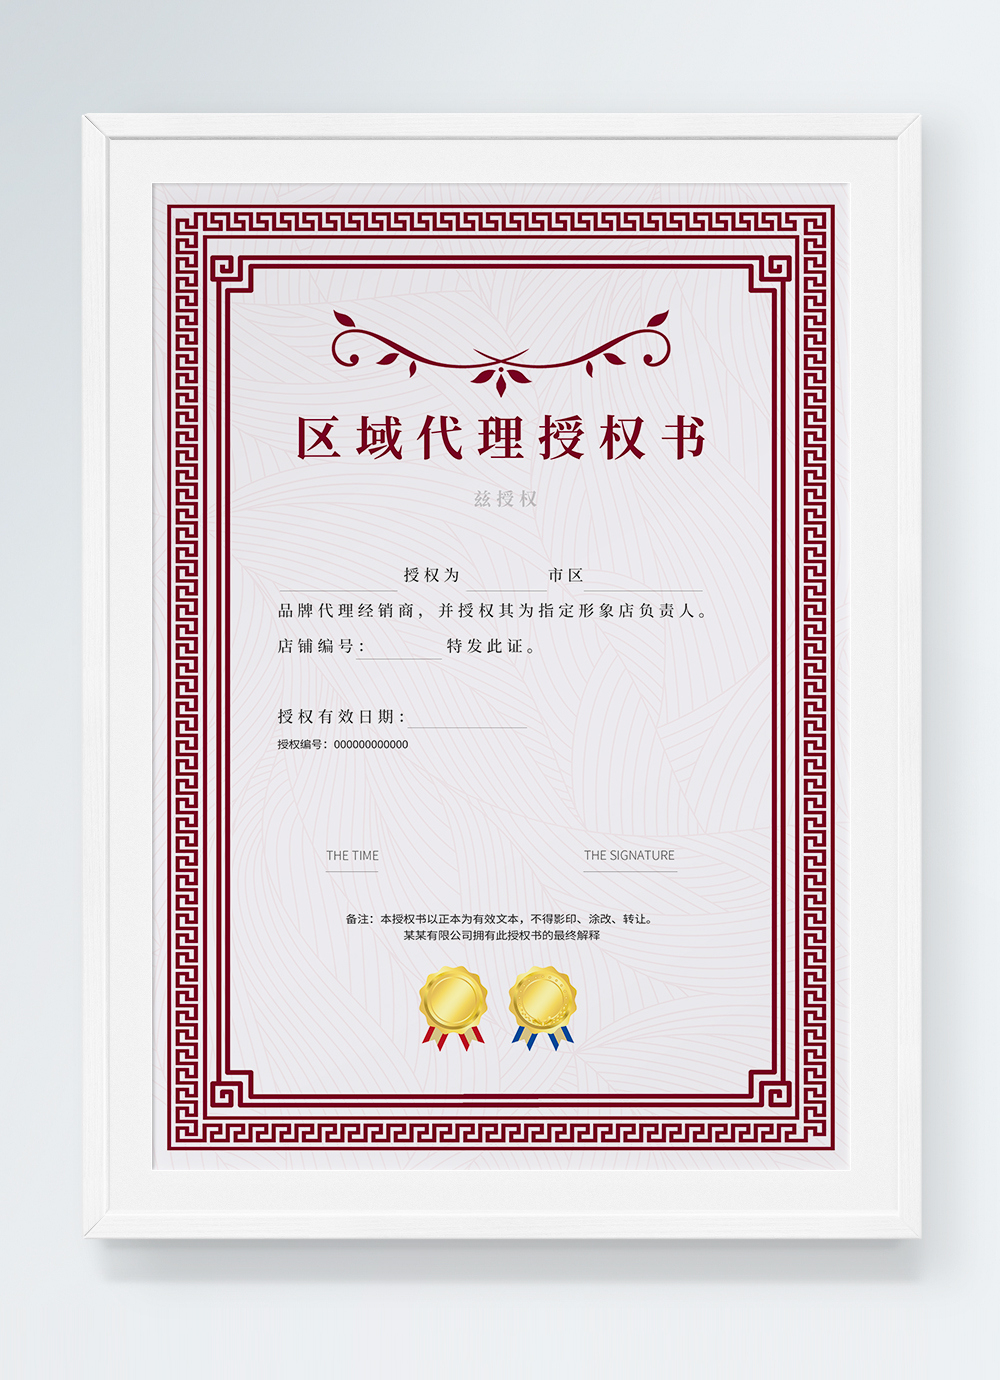 Vertical Authorization Certificate Design Template Image_Picture Free with regard to Certificate Of Authorization Template